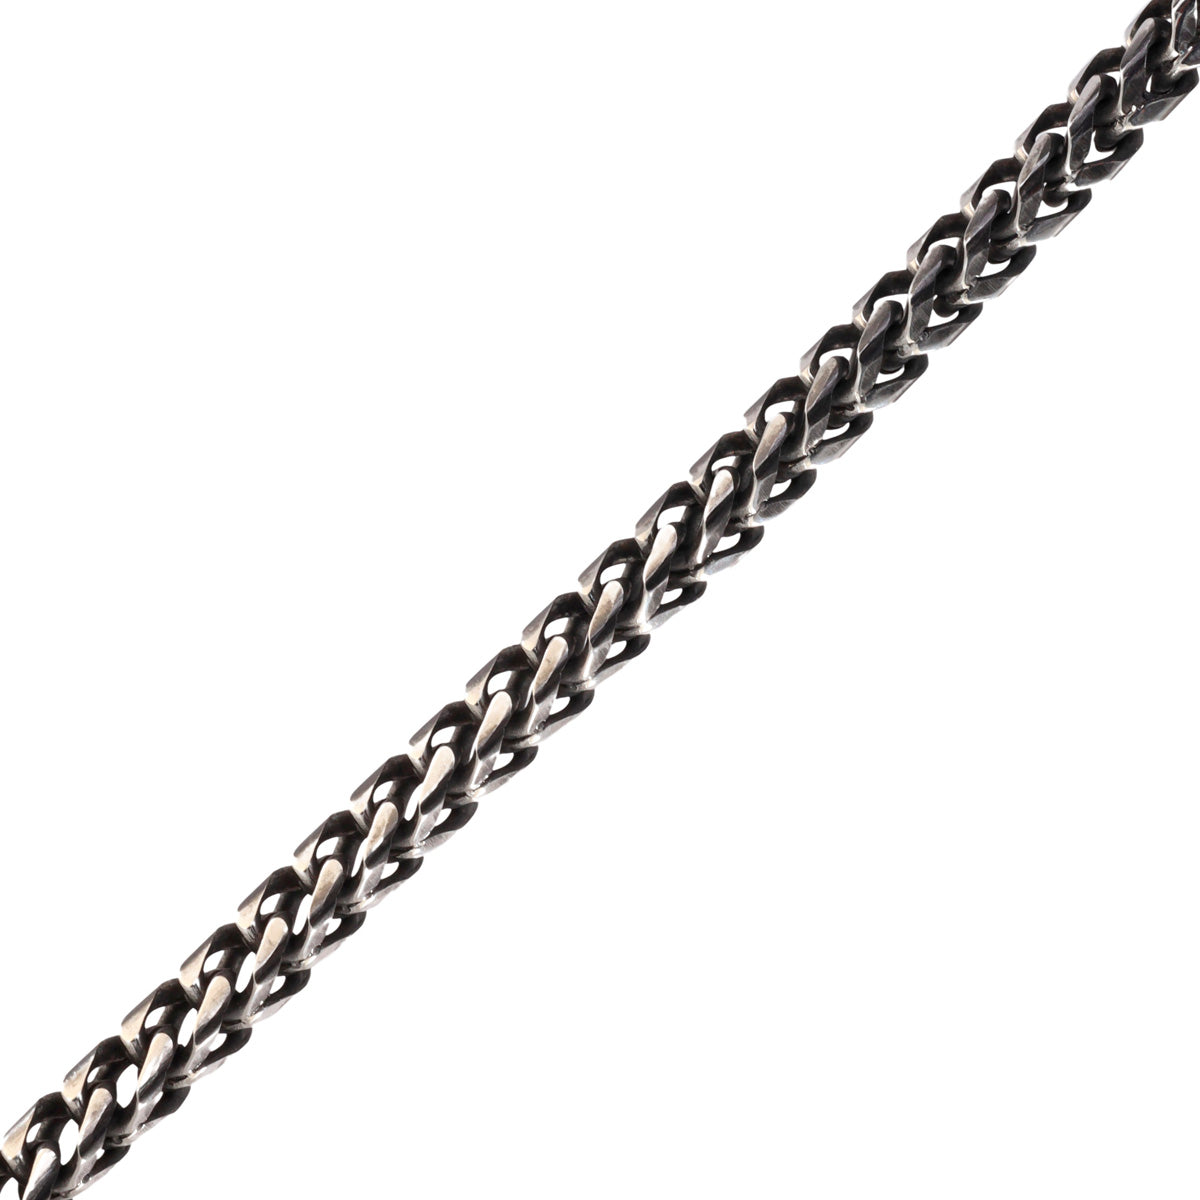 Square armoured chain steel 55cm